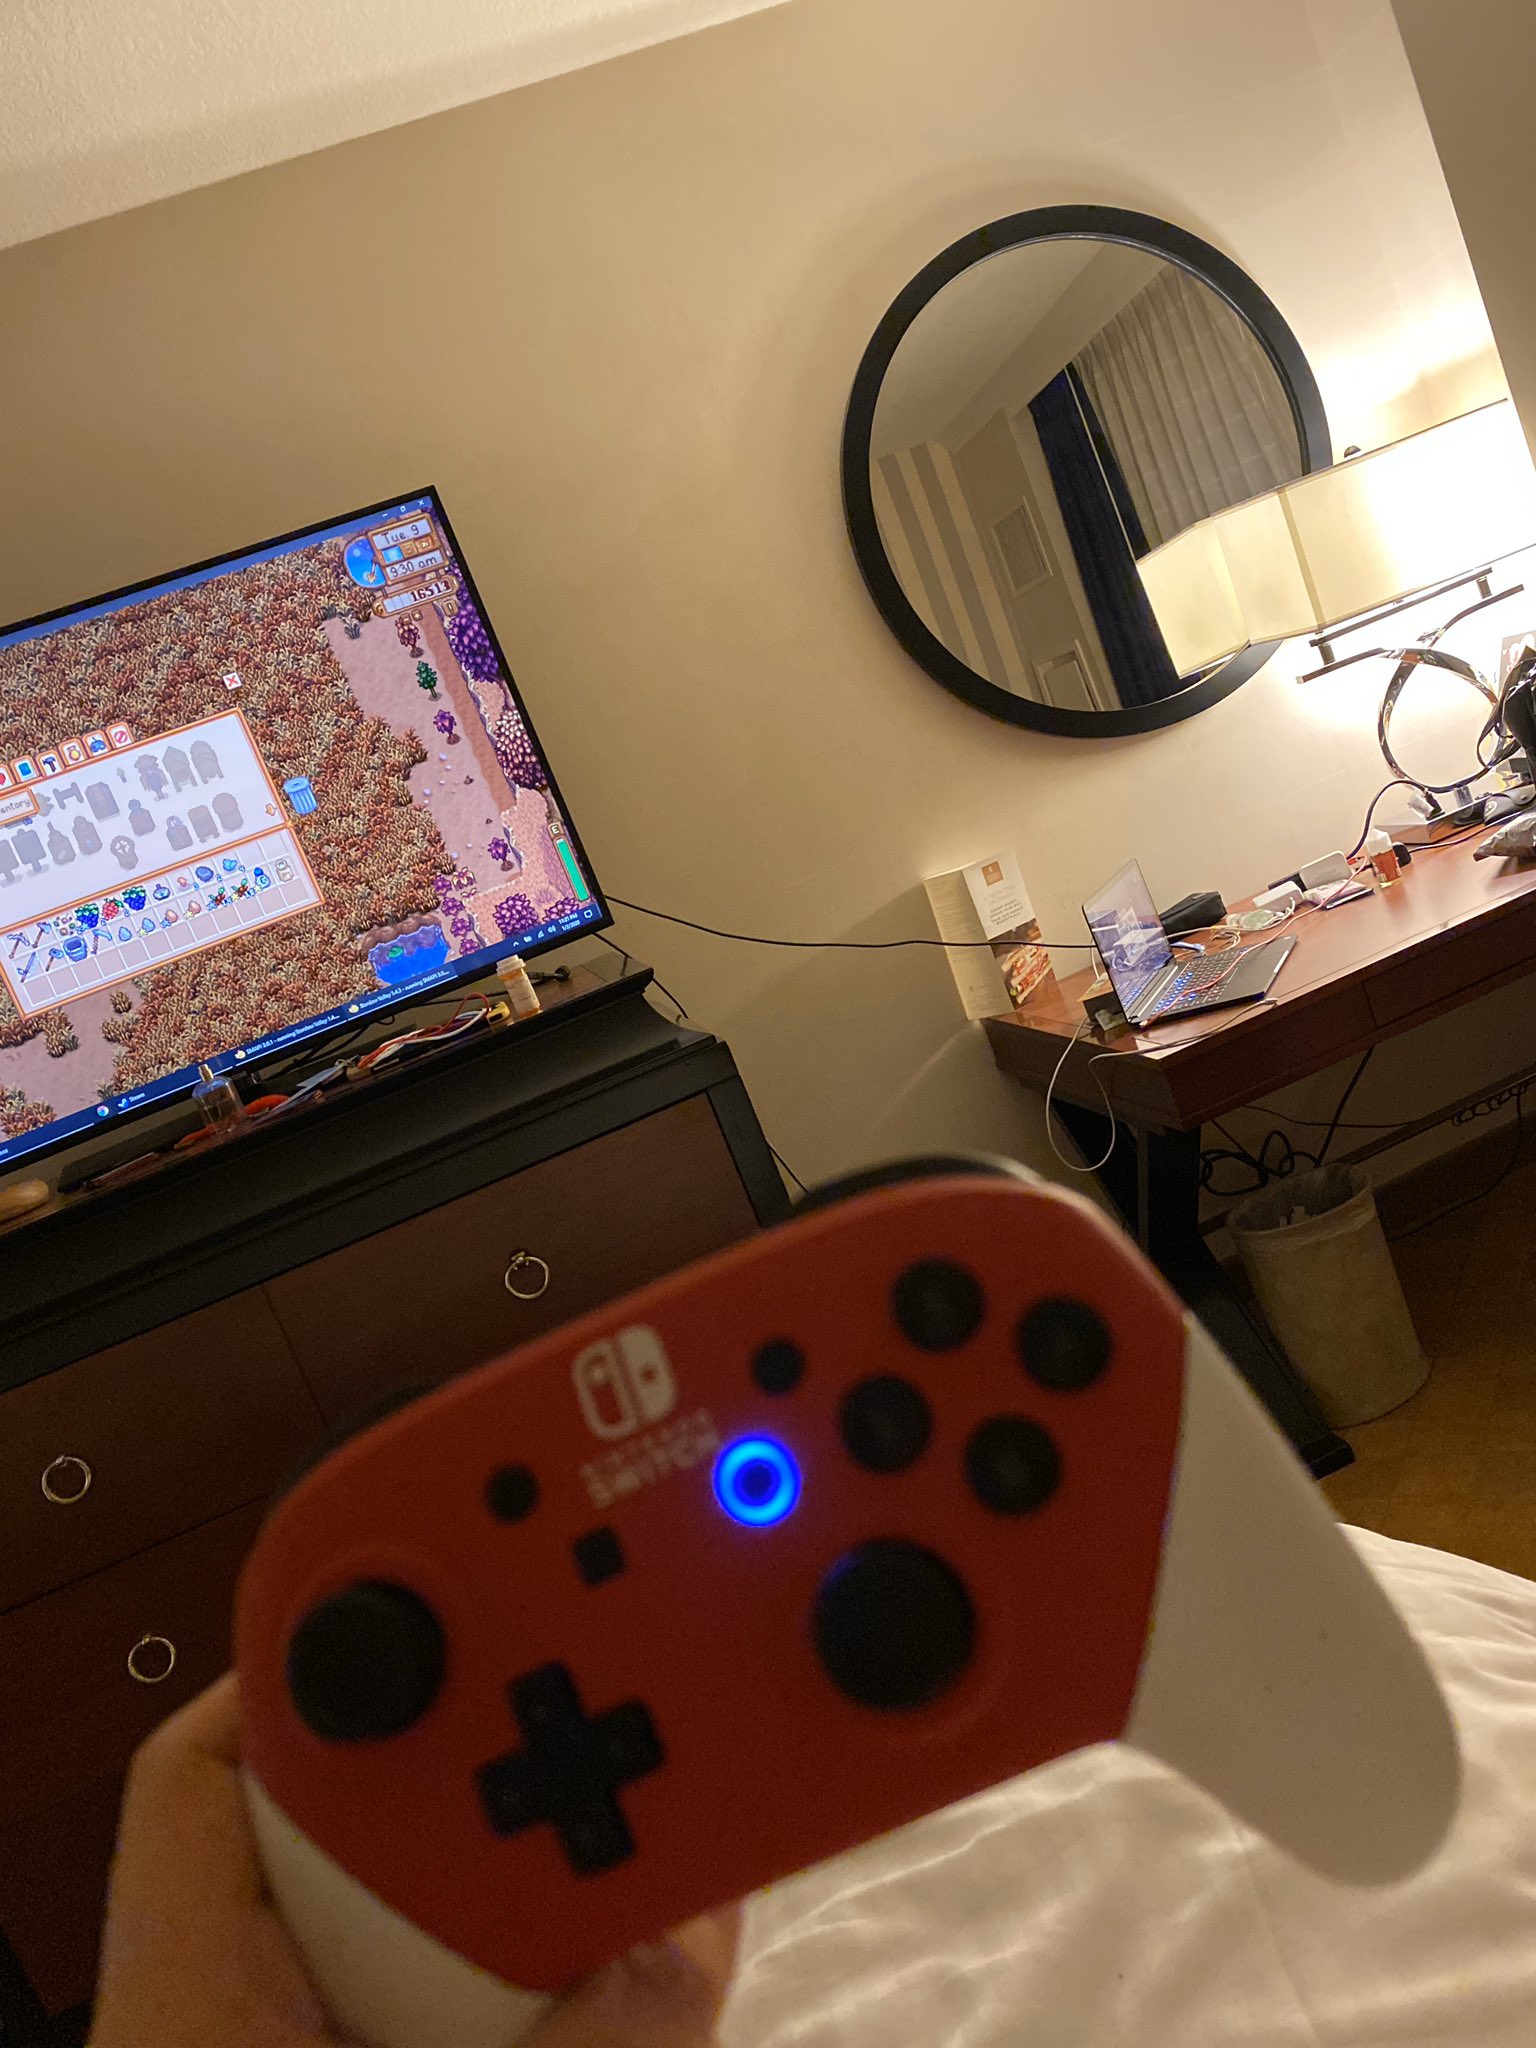 Austin John Plays I Love My Switch But I Really Love Pc Gaming I M Using My Pro Controller Wirelessly With My Razer Blade To Play Modded Stardew Valley On